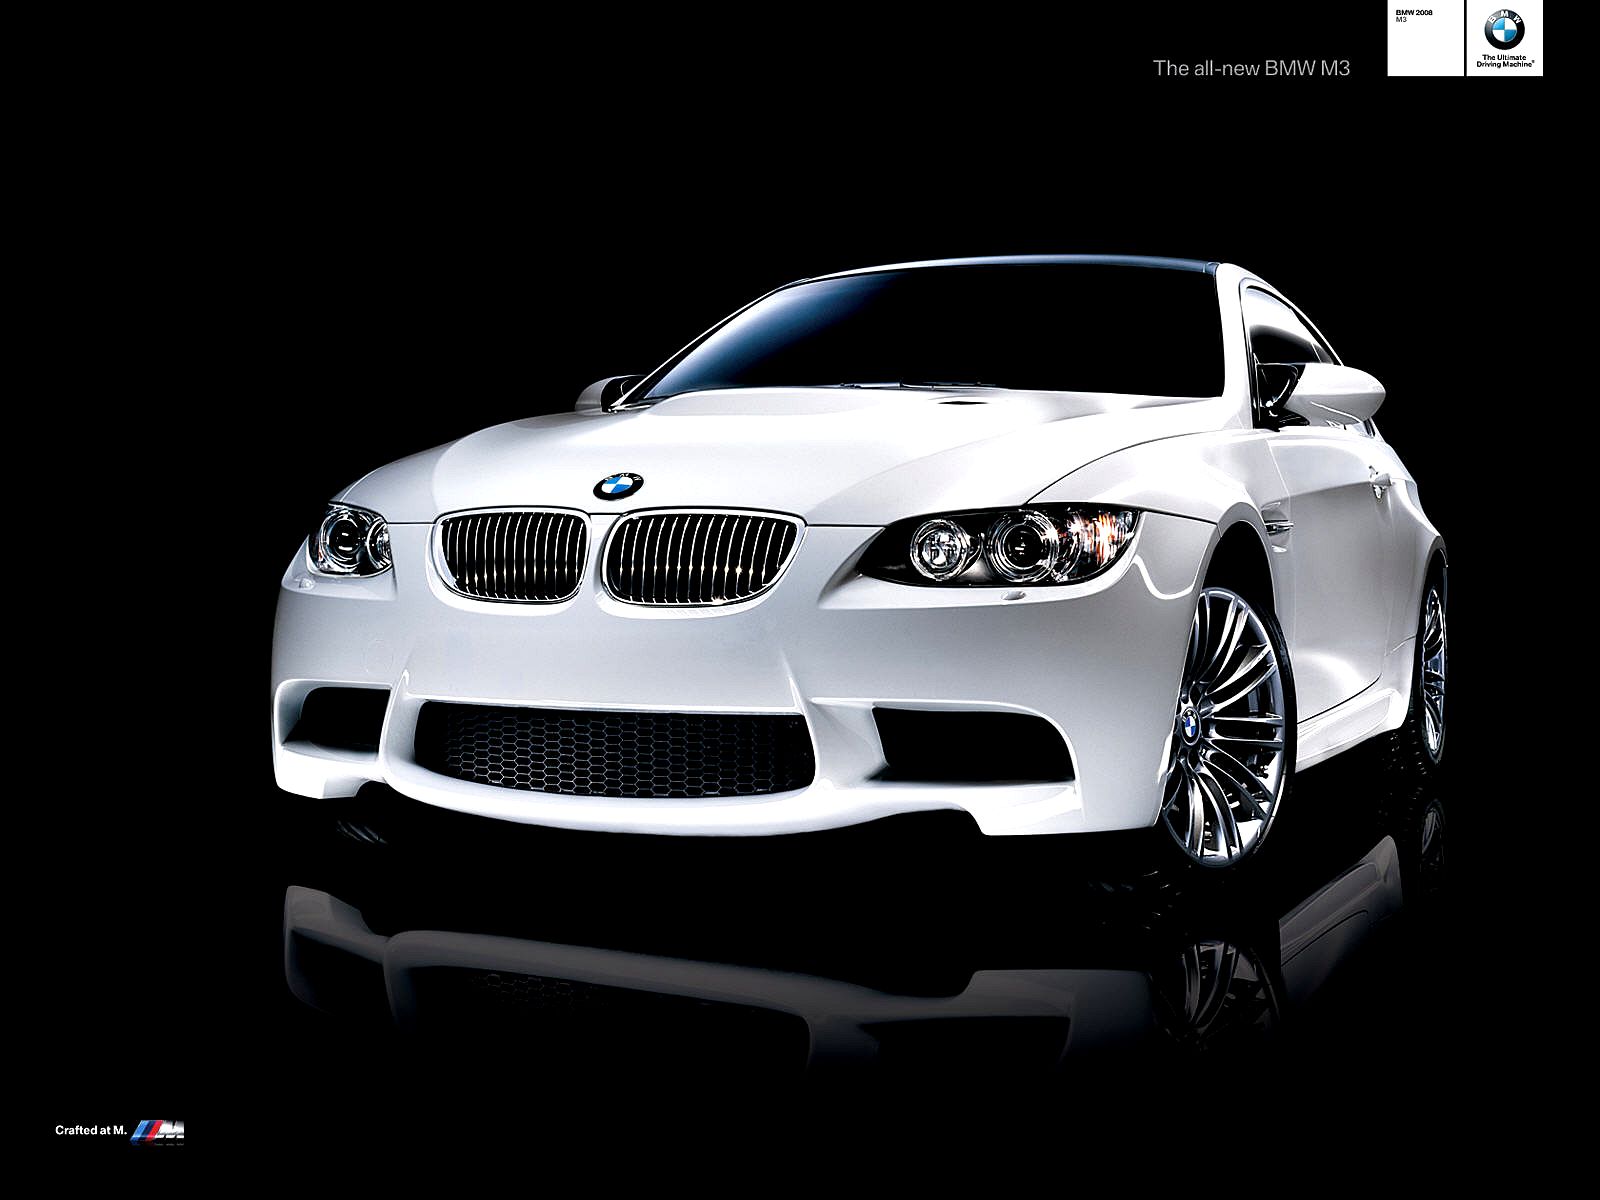 images of bmw cars in hd